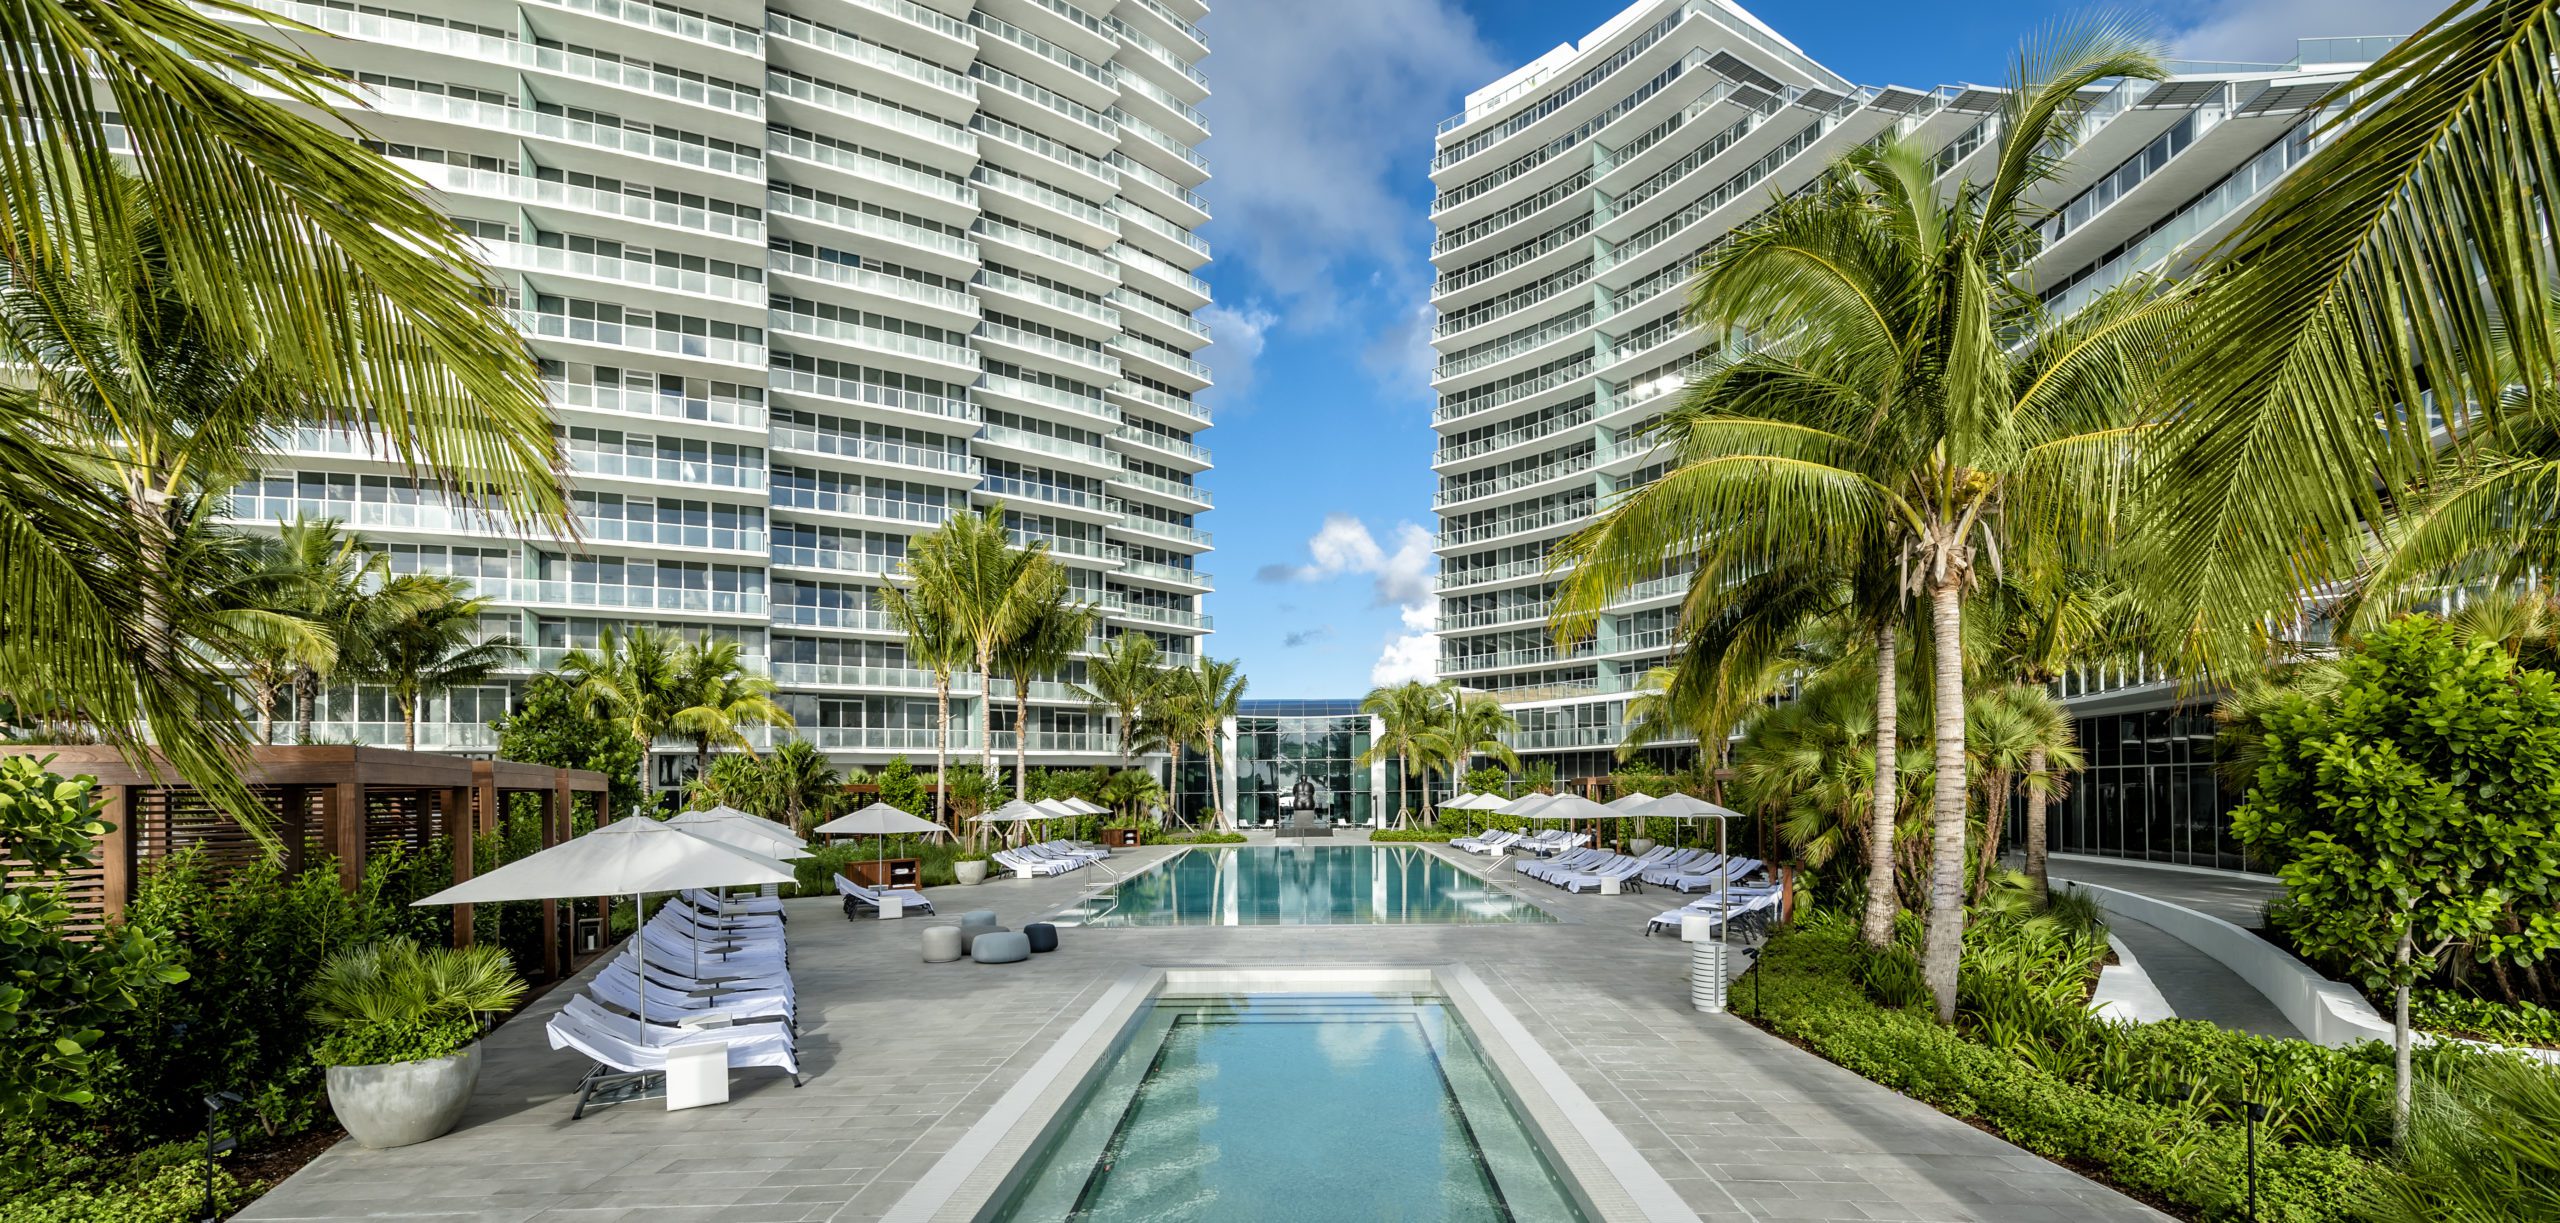 Looking to Buy a Luxury Condo in Fort Lauderdale Florida? The 7 Most Important Things to Consider